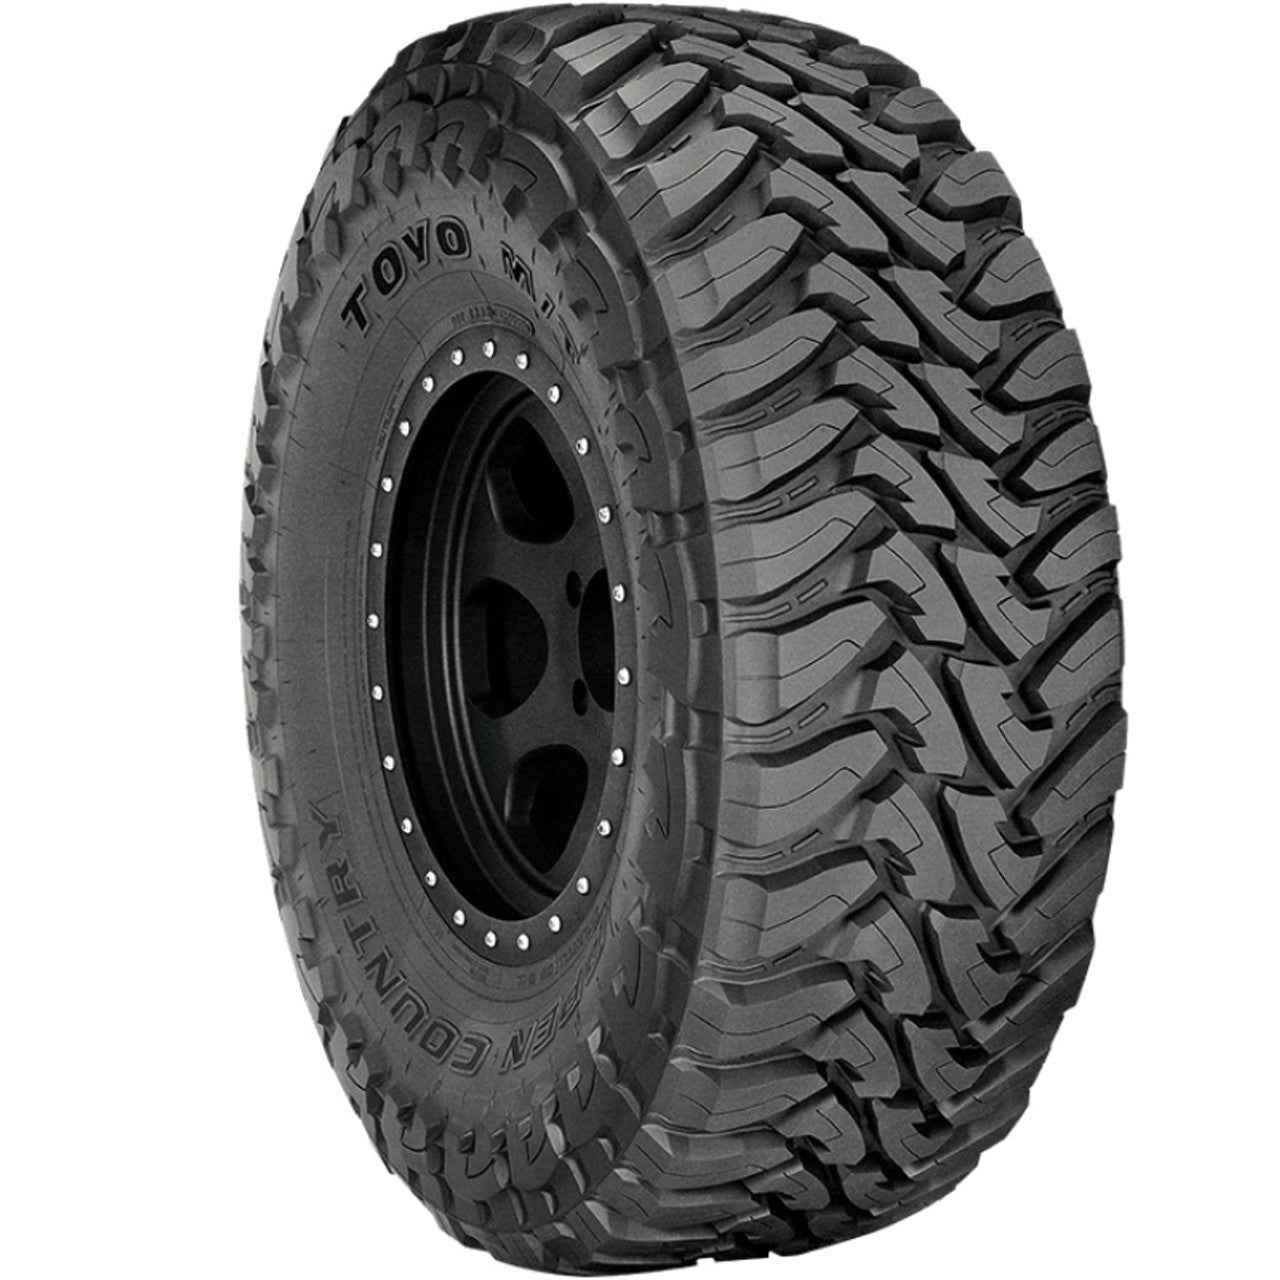 Toyo Open Country Mt - 265/70-17